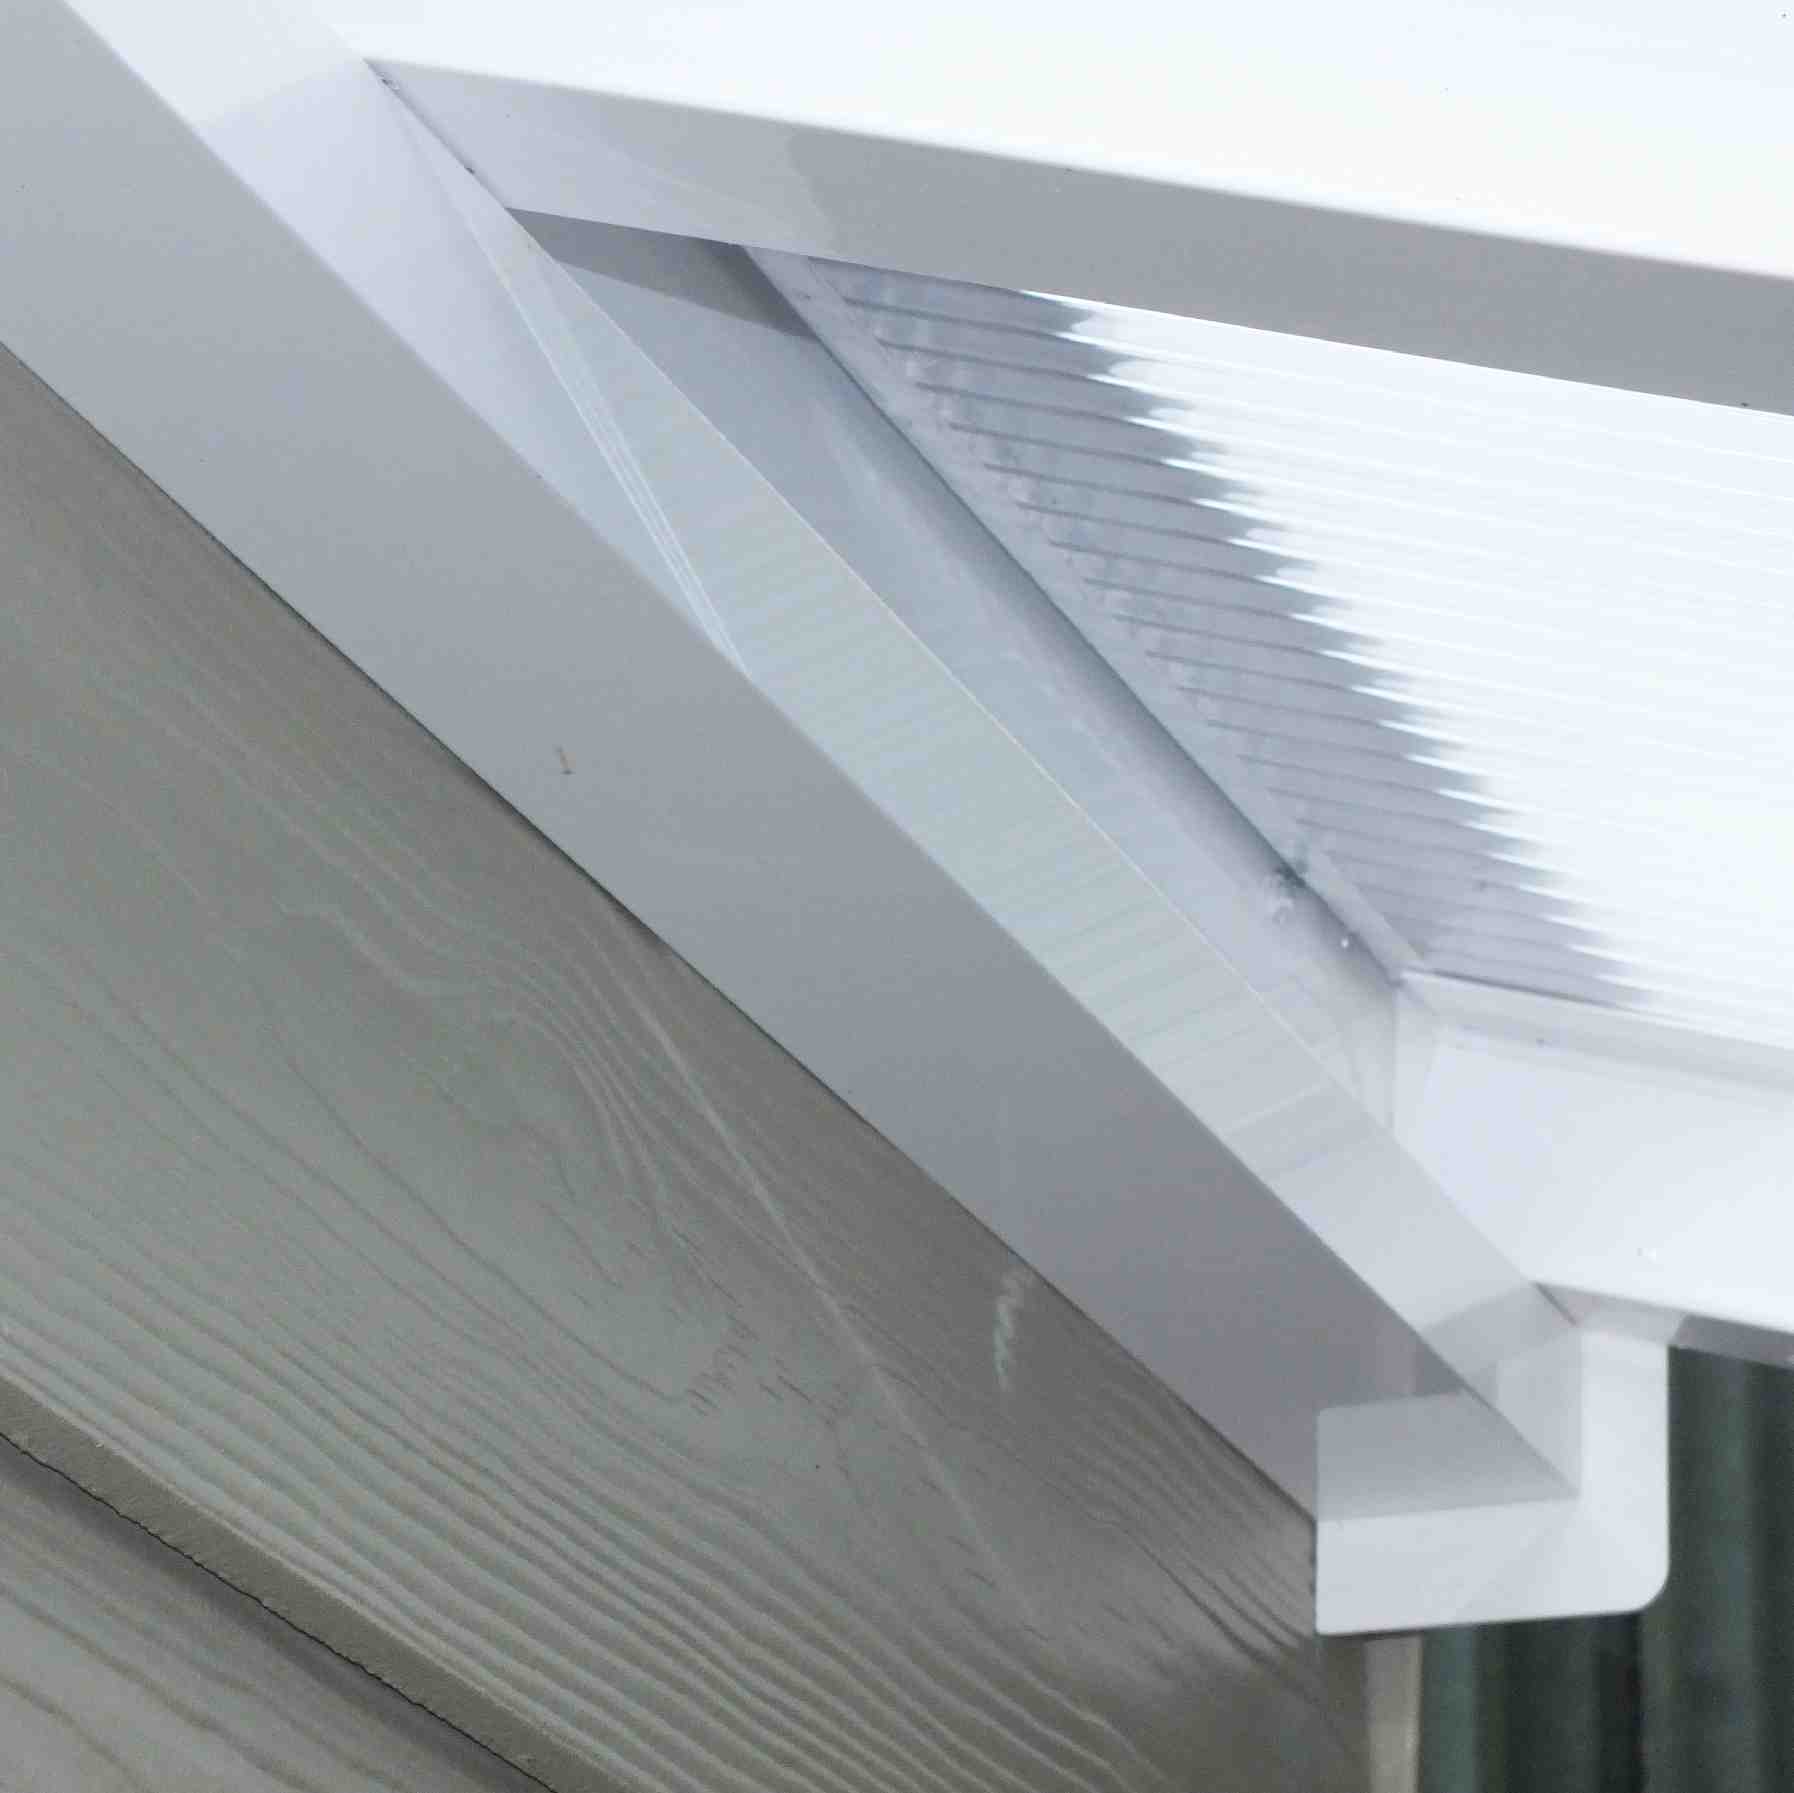 Great deals on Omega Verandah White with 16mm Polycarbonate Glazing - 11.8m (W) x 4.5m (P), (5) Supporting Posts